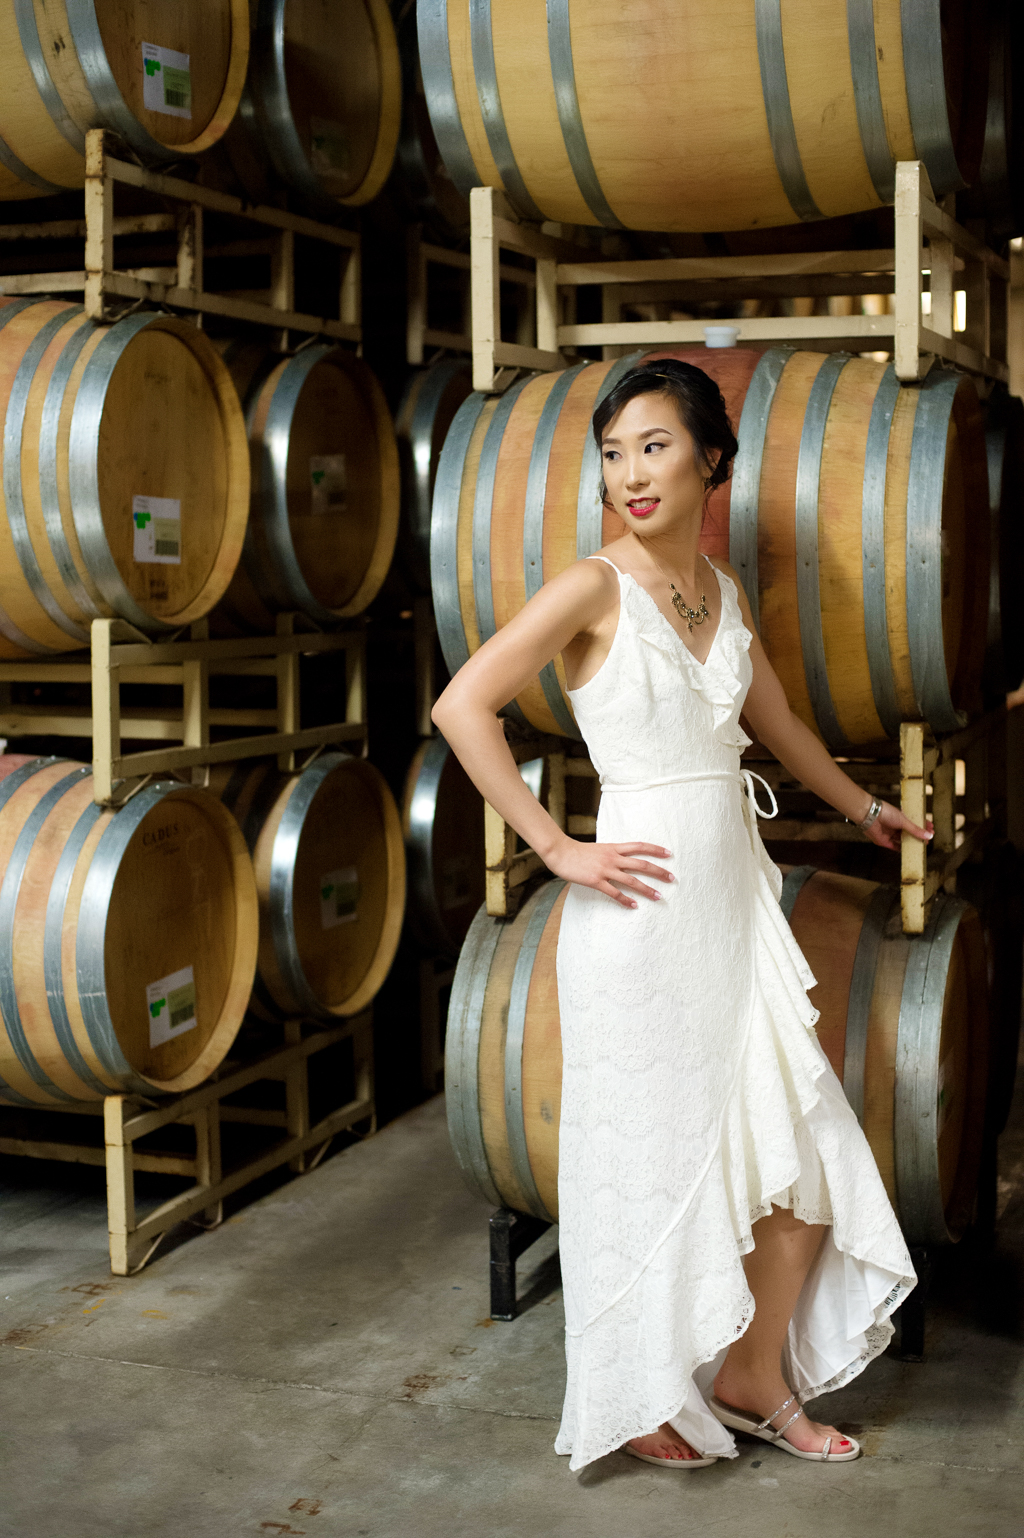 bride leans against wine barrels in the winery